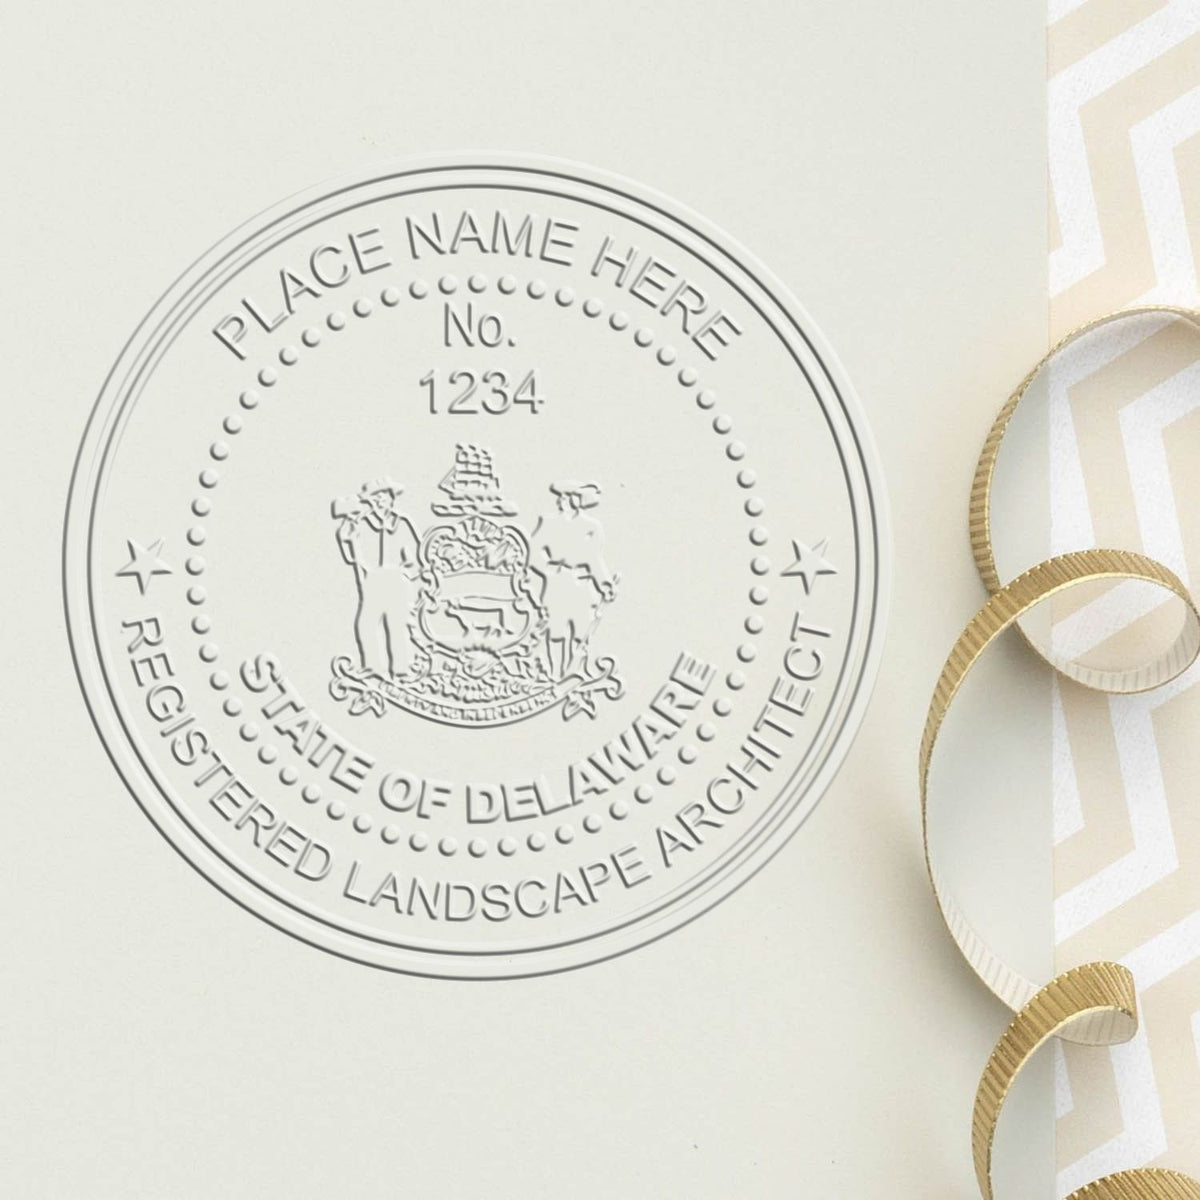 The Soft Pocket Delaware Landscape Architect Embosser stamp impression comes to life with a crisp, detailed photo on paper - showcasing true professional quality.